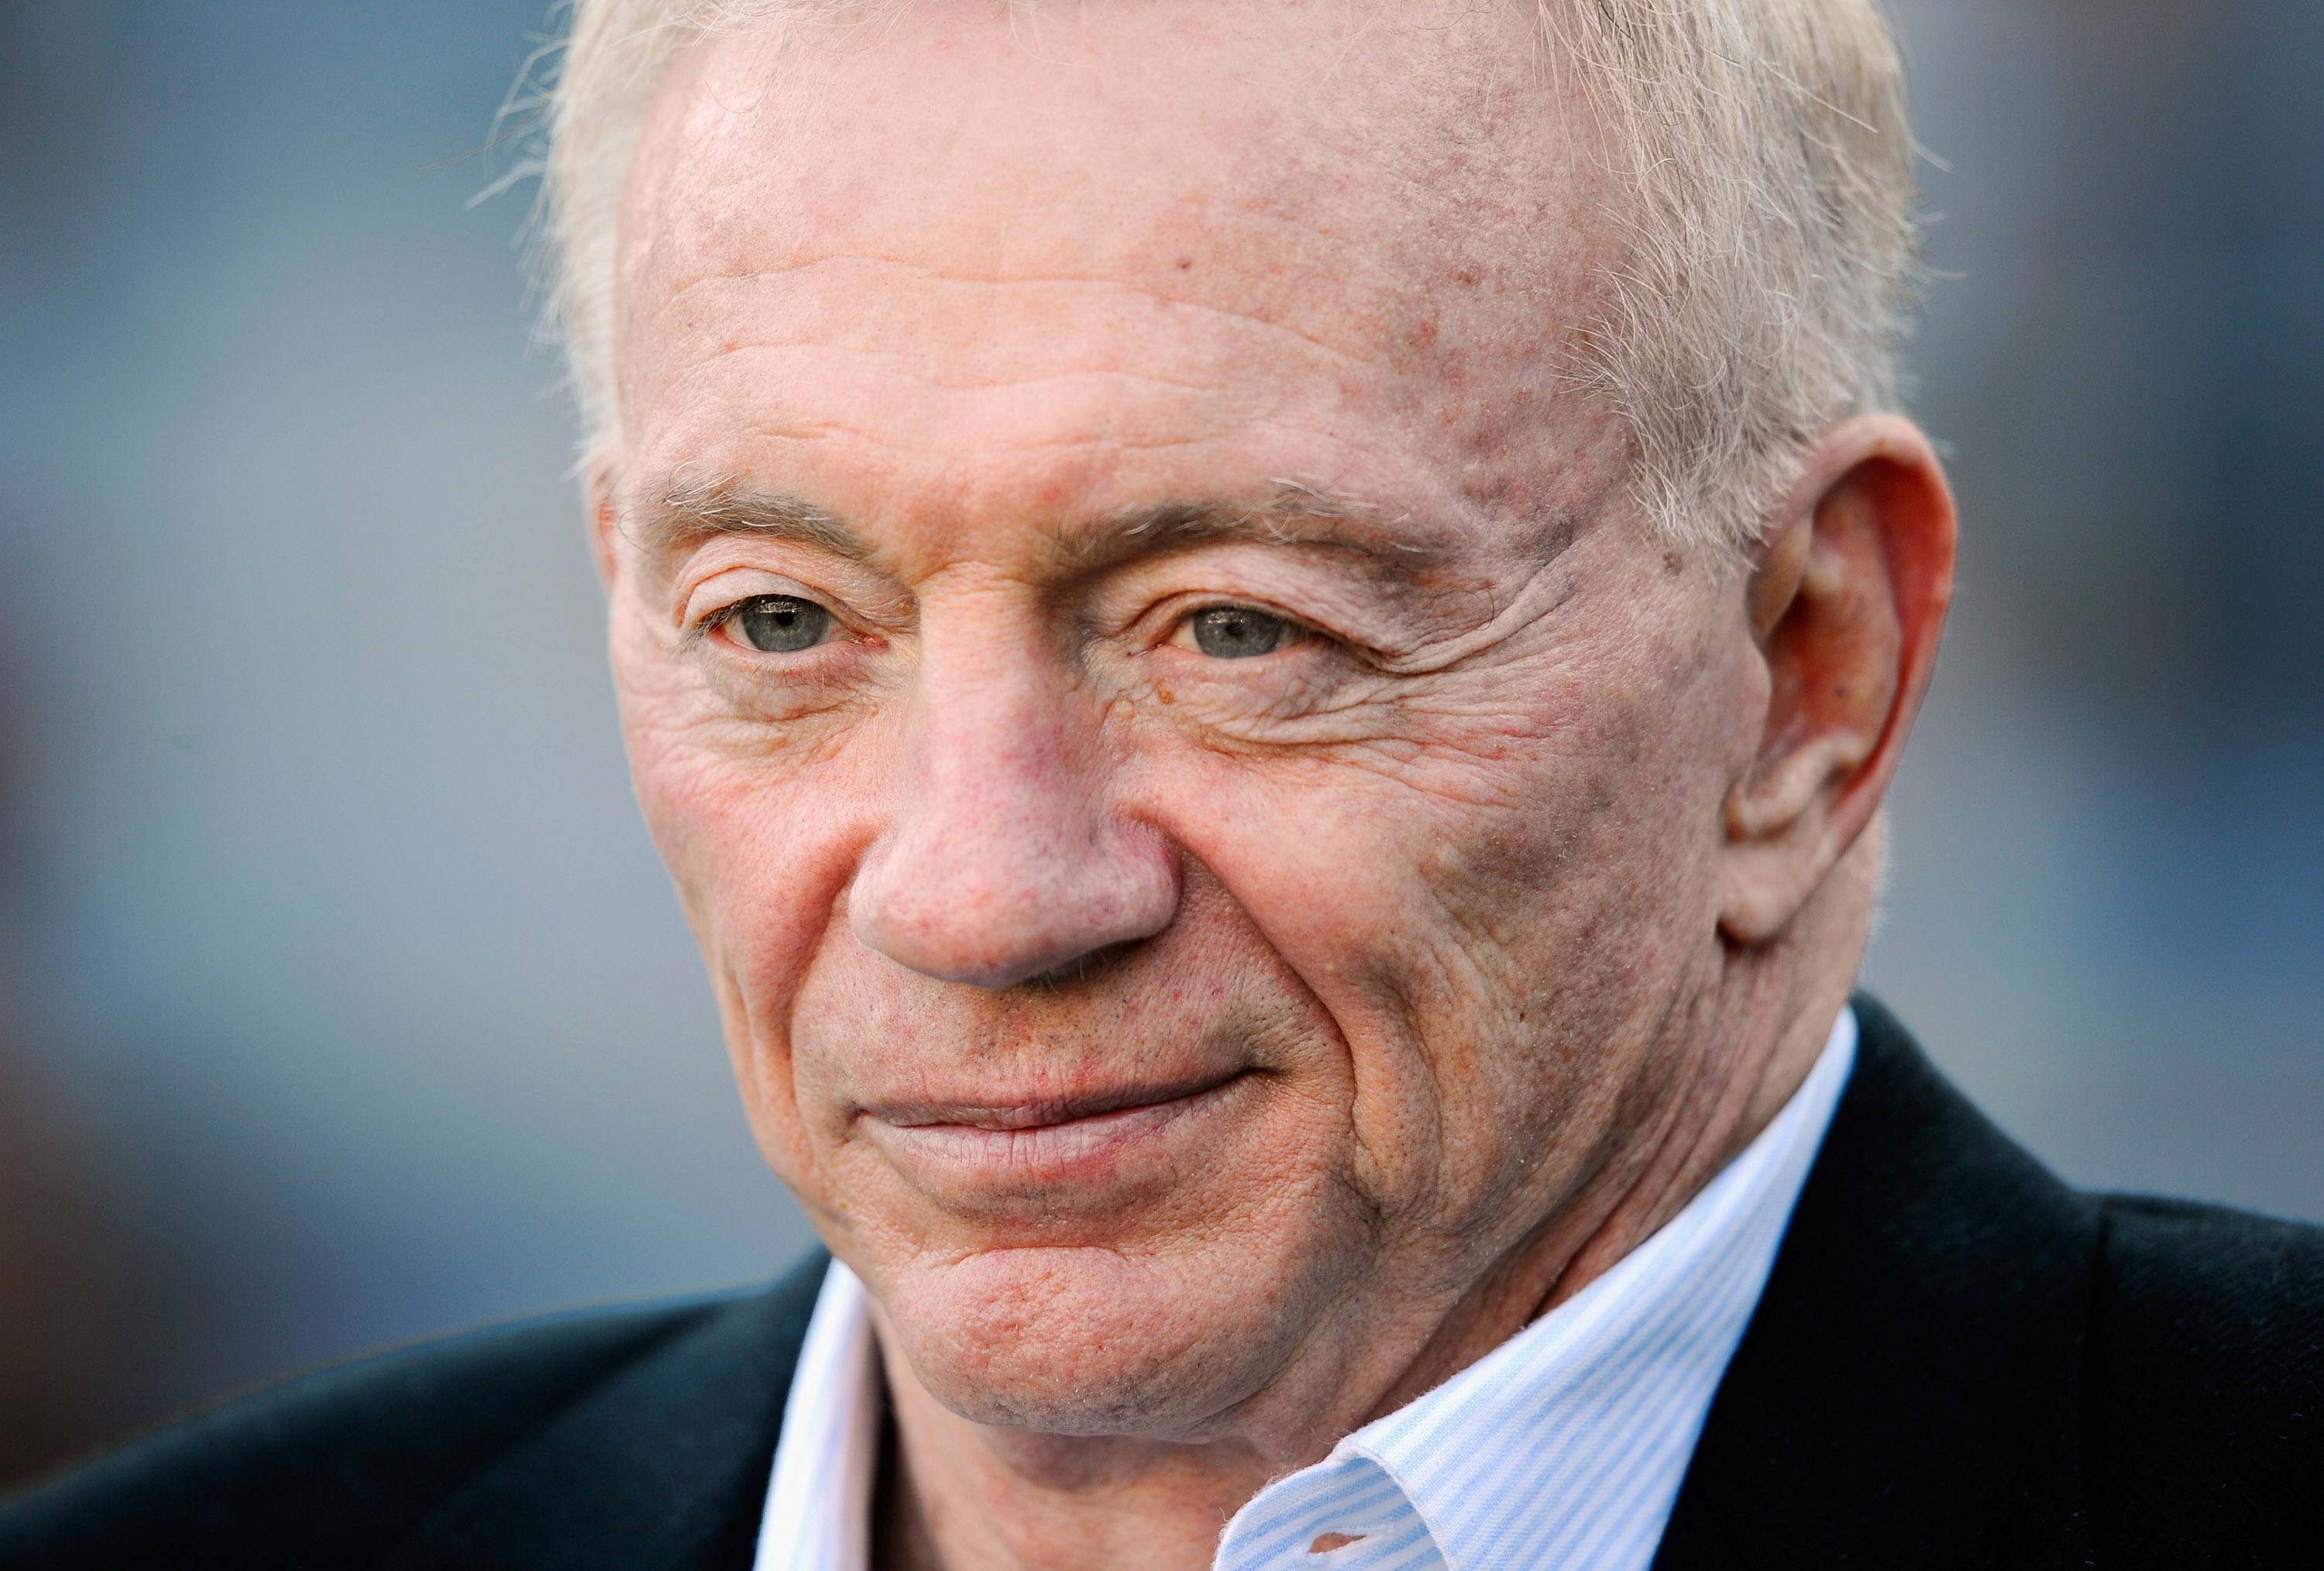 SAN DIEGO - AUGUST 21:  Dallas Cowboys owner Jerry Jones during preseason game against the San Diego Chargers at Qualcomm Stadium on August 21, 2010 in San Diego, California.  (Photo by Kevork Djansezian/Getty Images)